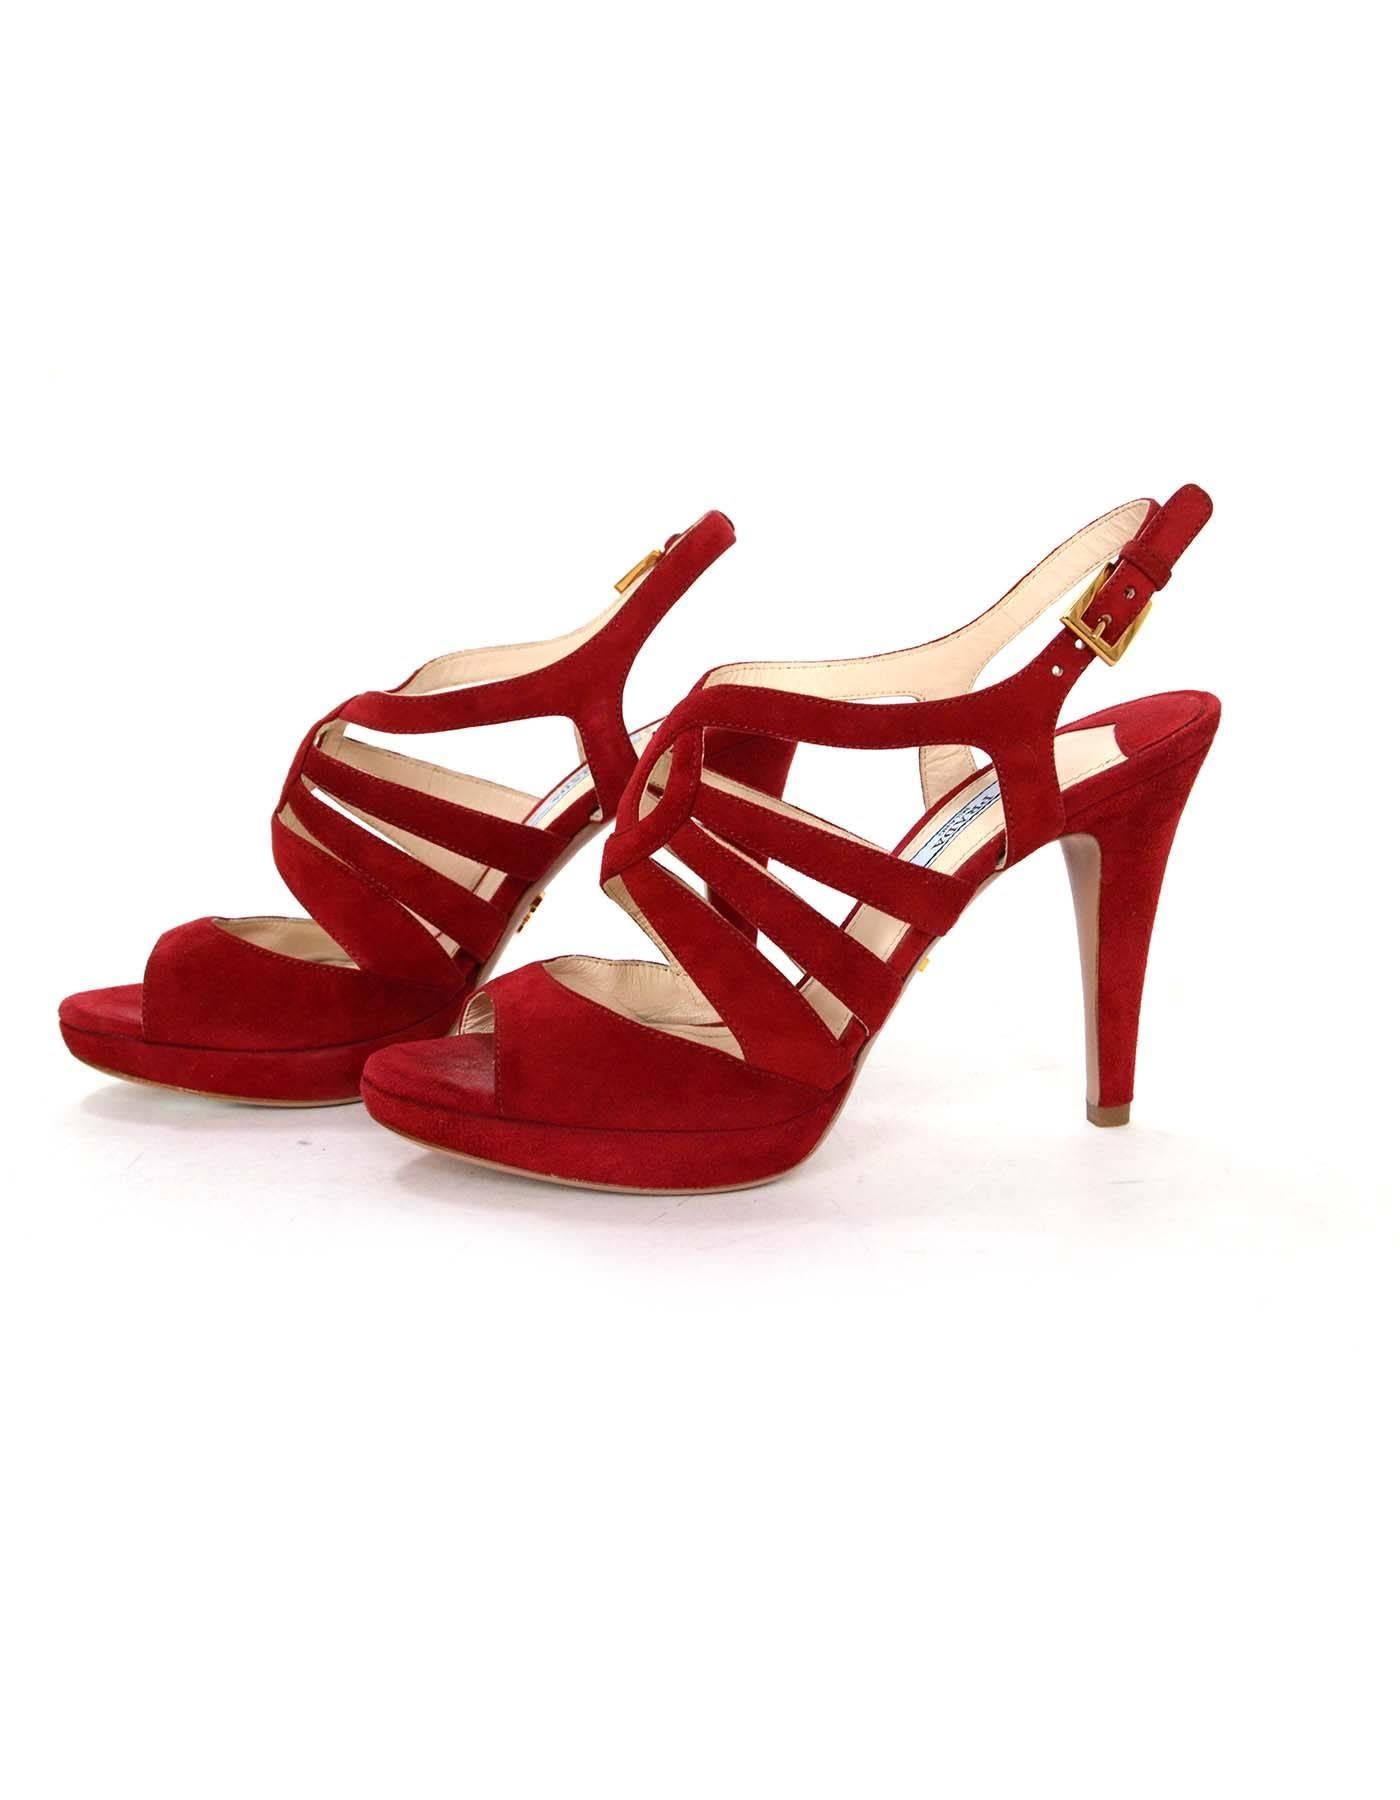 Prada Red Suede Strappy Sandals 
Made In: Italy
Color: Red
Materials: Suede
Closure/Opening: Ankle strap with buckle and notch closure
Sole Stamp: Made in Italy 38 Prada
Overall Condition: Excellent pre-owned condition
Marked Size: 38
Heel